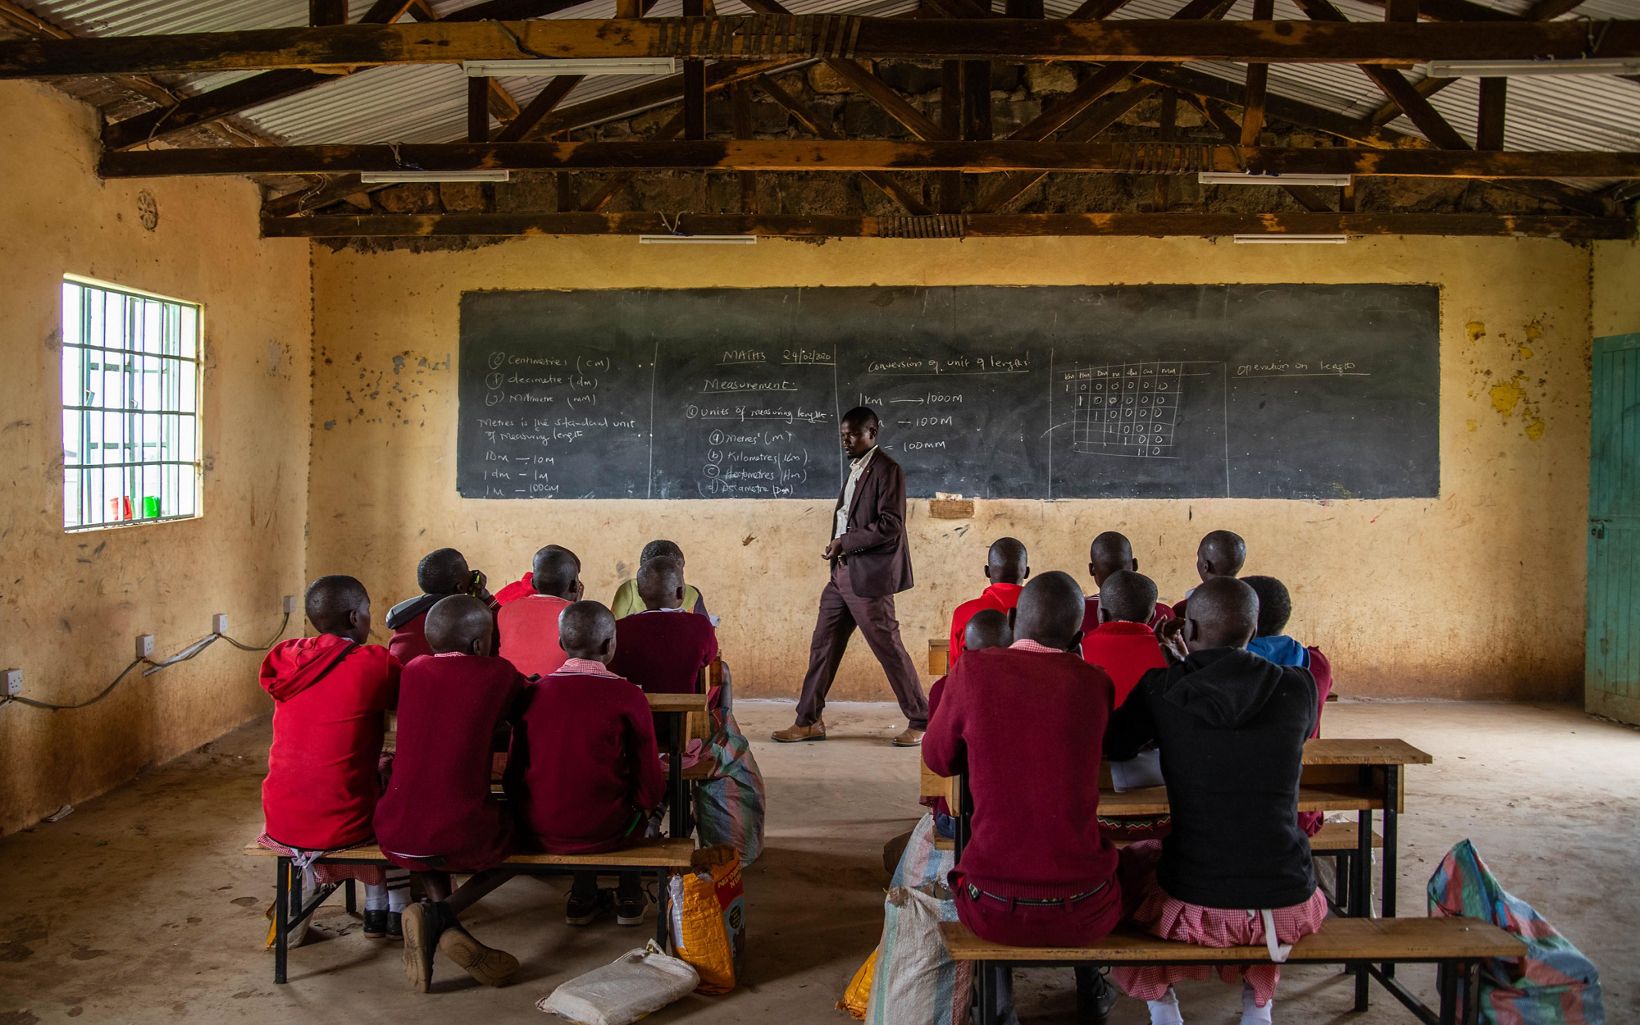 Education Benefits from ecotourism and other enterprises in community conservancies often help fund new schools and scholarships.  © Roshni Lodhia